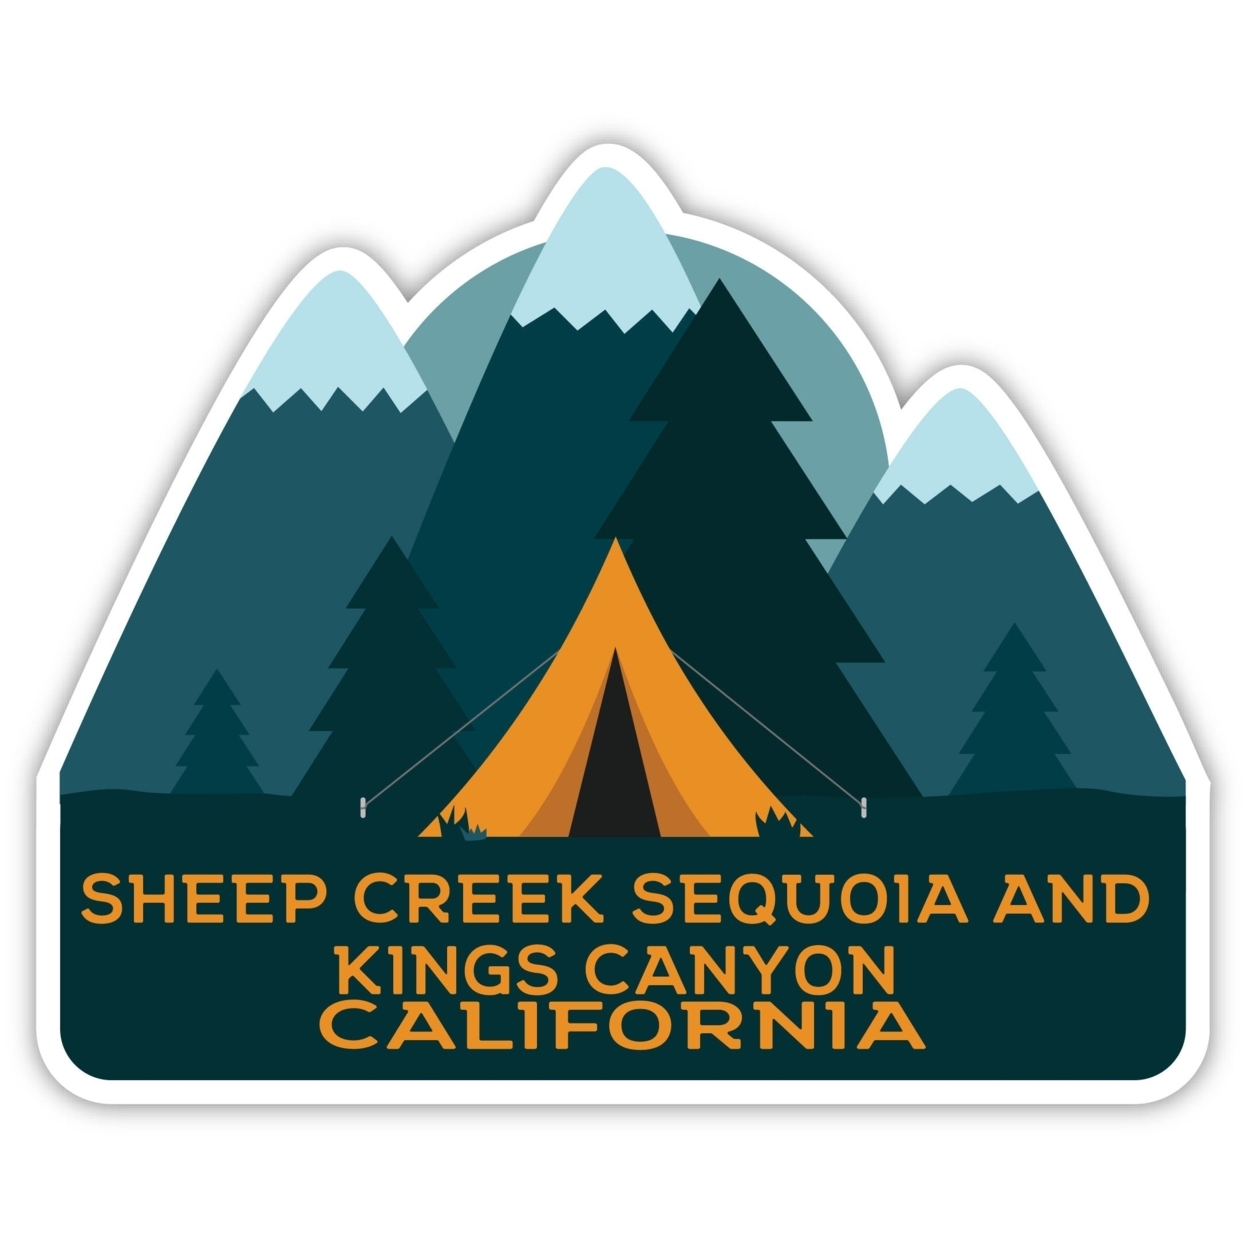 Sheep Creek Sequoia And Kings Canyon California Souvenir Decorative Stickers (Choose Theme And Size) - Single Unit, 4-Inch, Tent